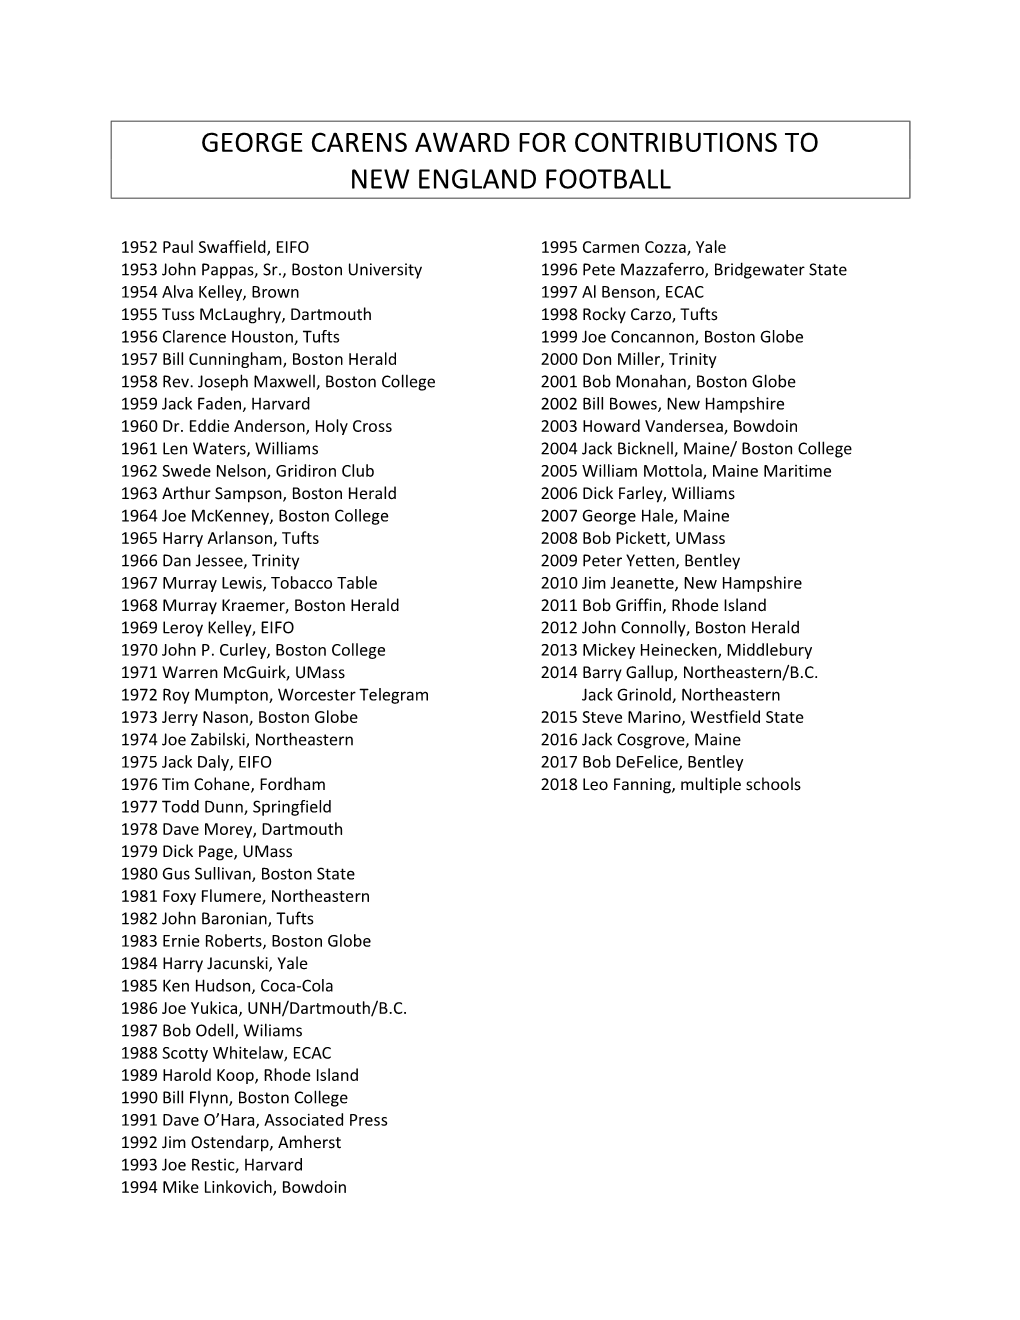 George Carens Award for Contributions to New England Football